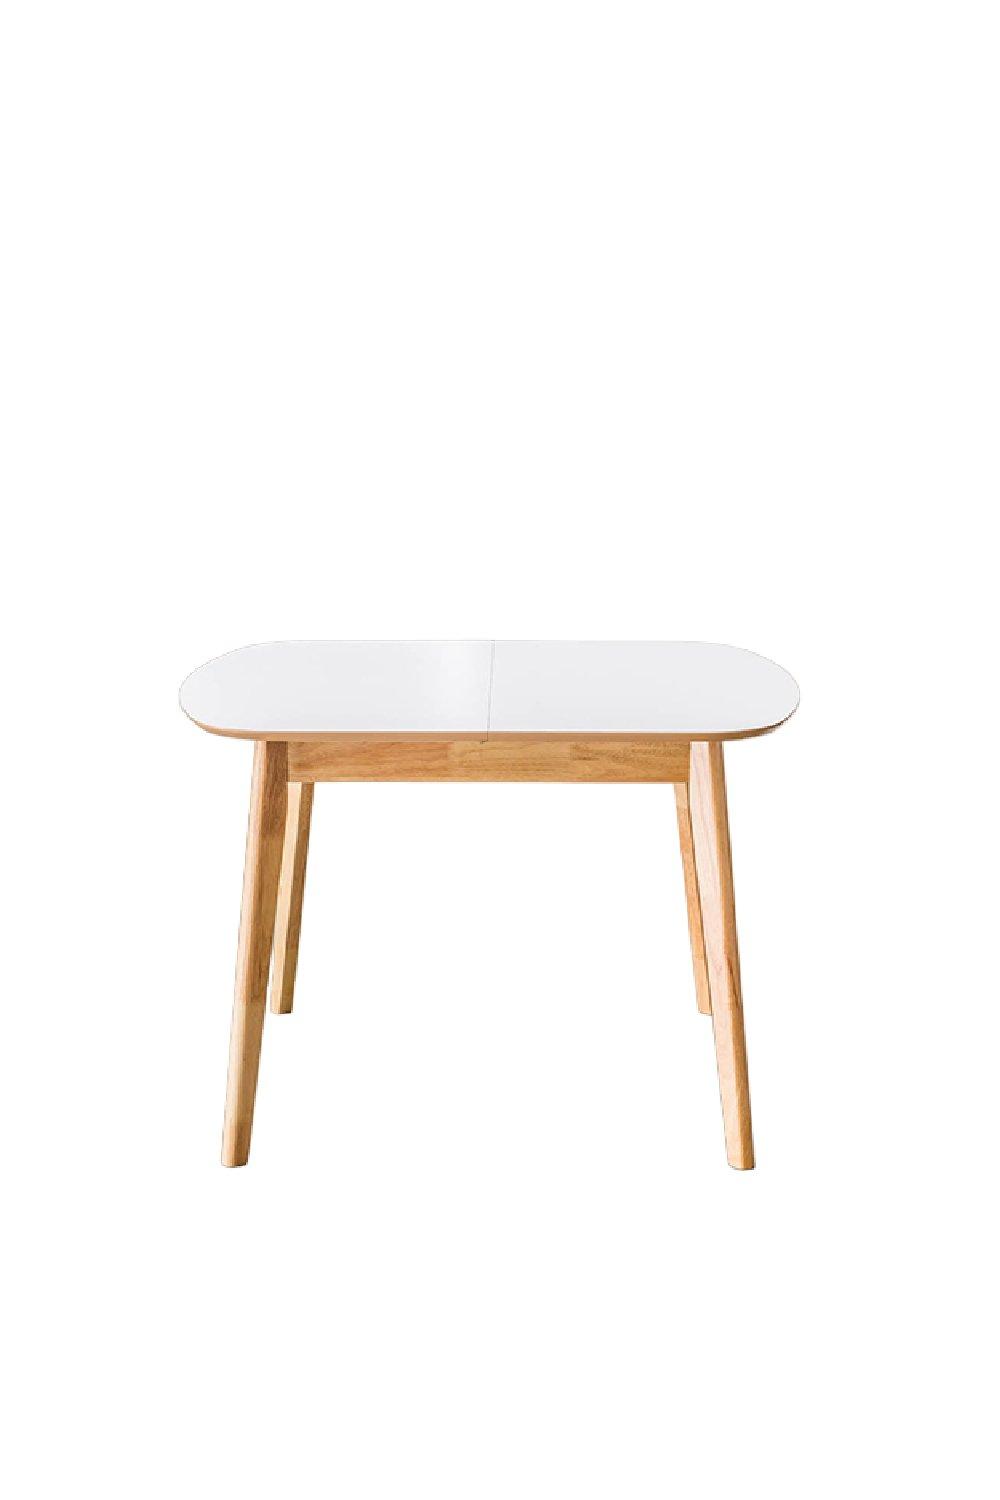 Abbey - Extending Indoor Dining Table - 106-136cm